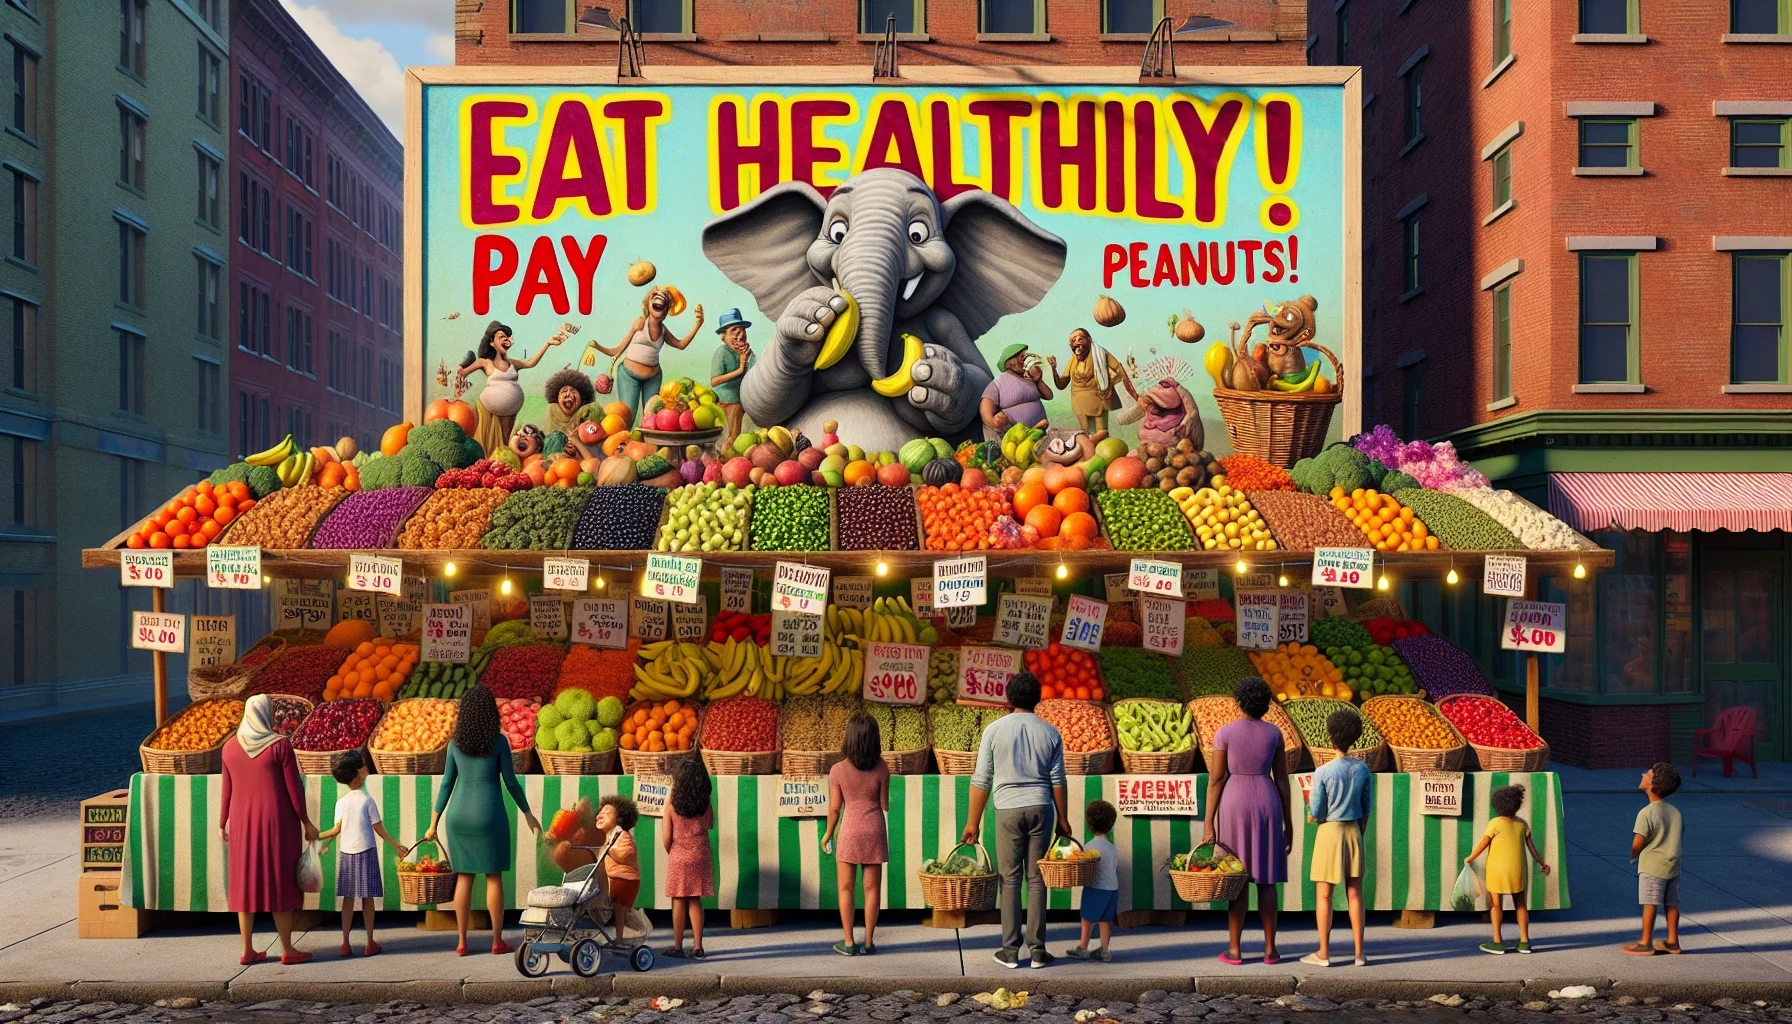 Imagine a humorous and realistic situation encouraging people to promote self-care by eating healthily on a budget. The central piece would be a fruit and vegetable stand, brightly color filled with diverse, fresh, and succulent offerings. A gigantic sign overhead humorously claims: 'Eat Healthily! Pay Peanuts!’ showing a caricature of an elephant happily munching on a basket of fruits and vegetables. At the stand, customers of diverse descents and genders are seen, each holding a basket and appears delighted to see the array of healthy and affordable options. Some are laughing, others sharing incredulous looks at the unbelievable prices.